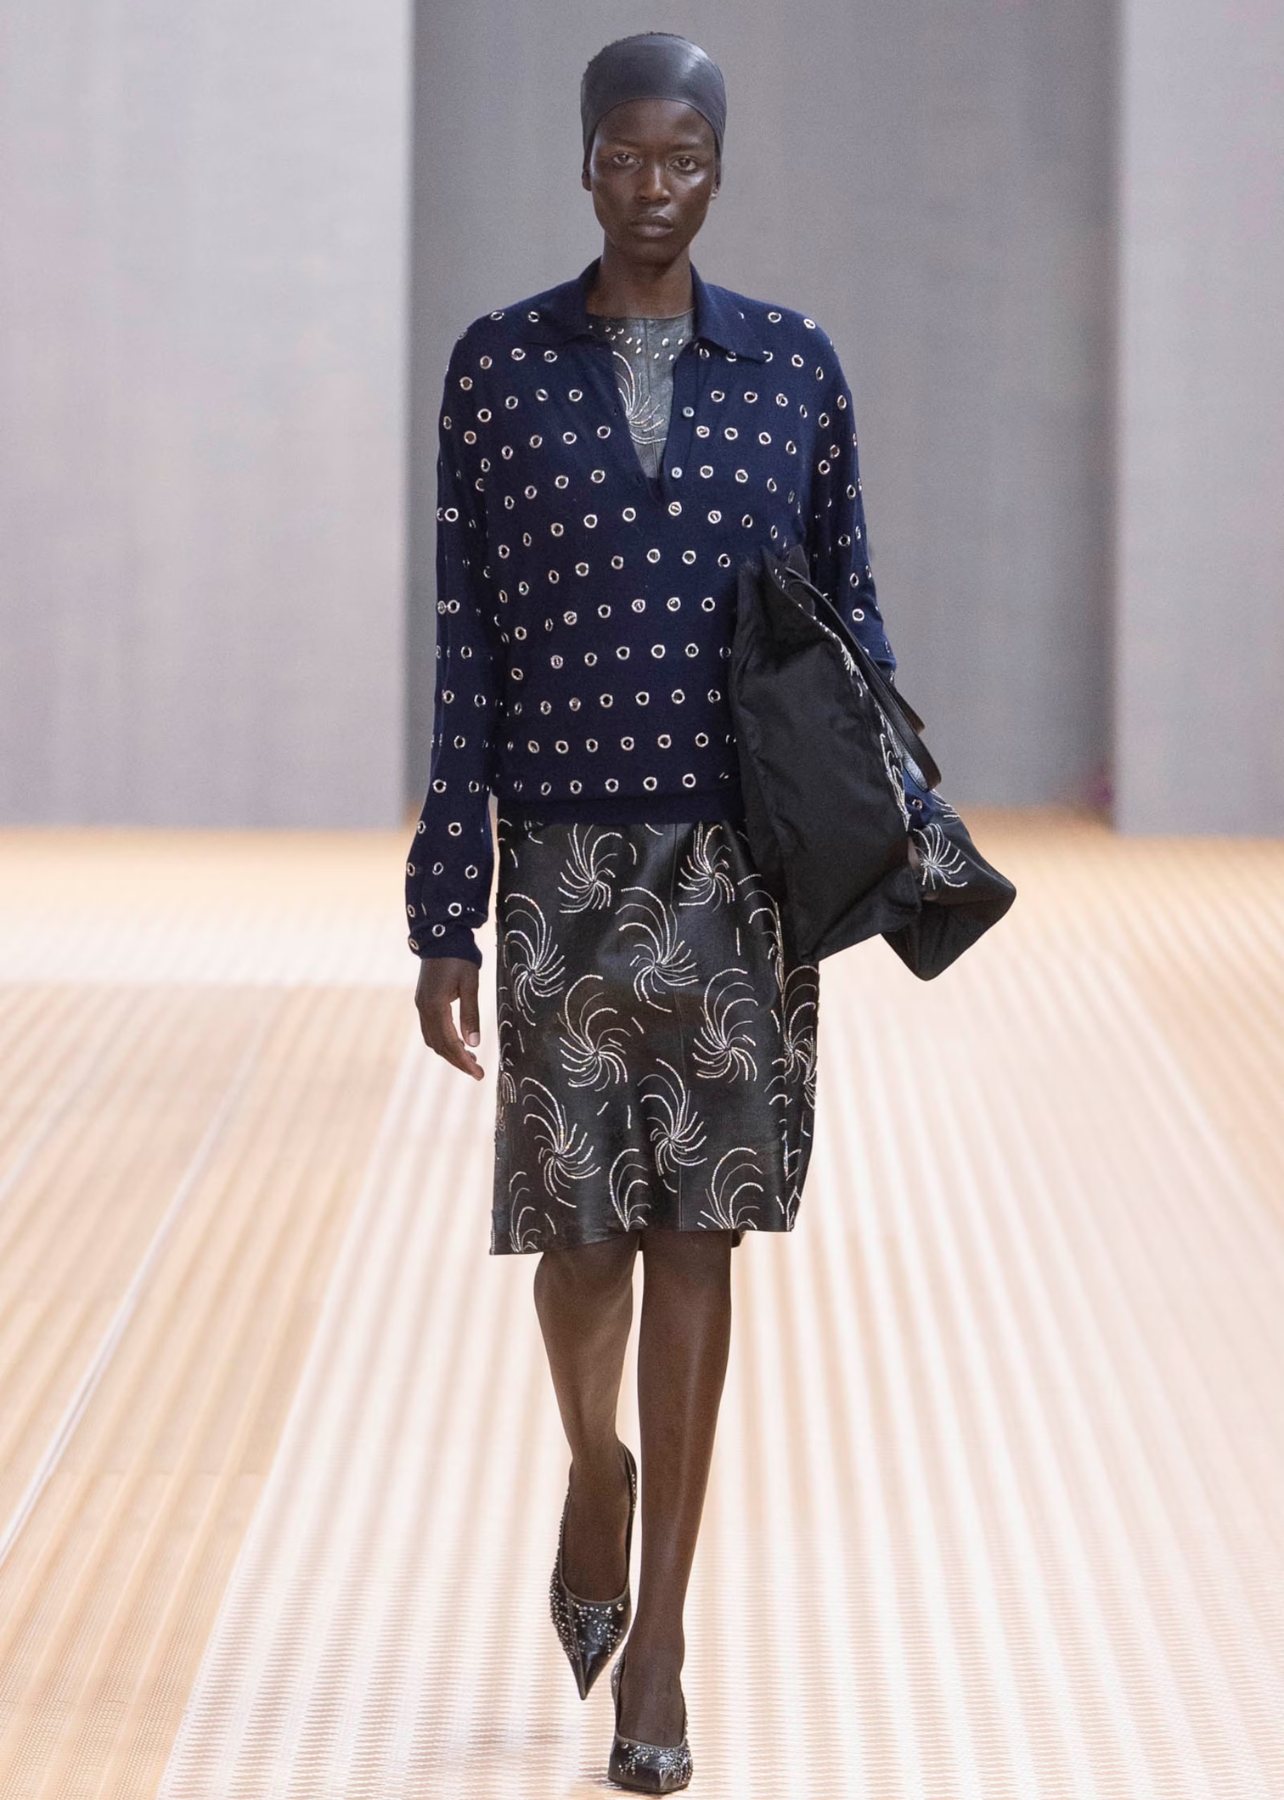 : Model on the runway for Prada from the Spring 2024 show at Milan Fashion Week